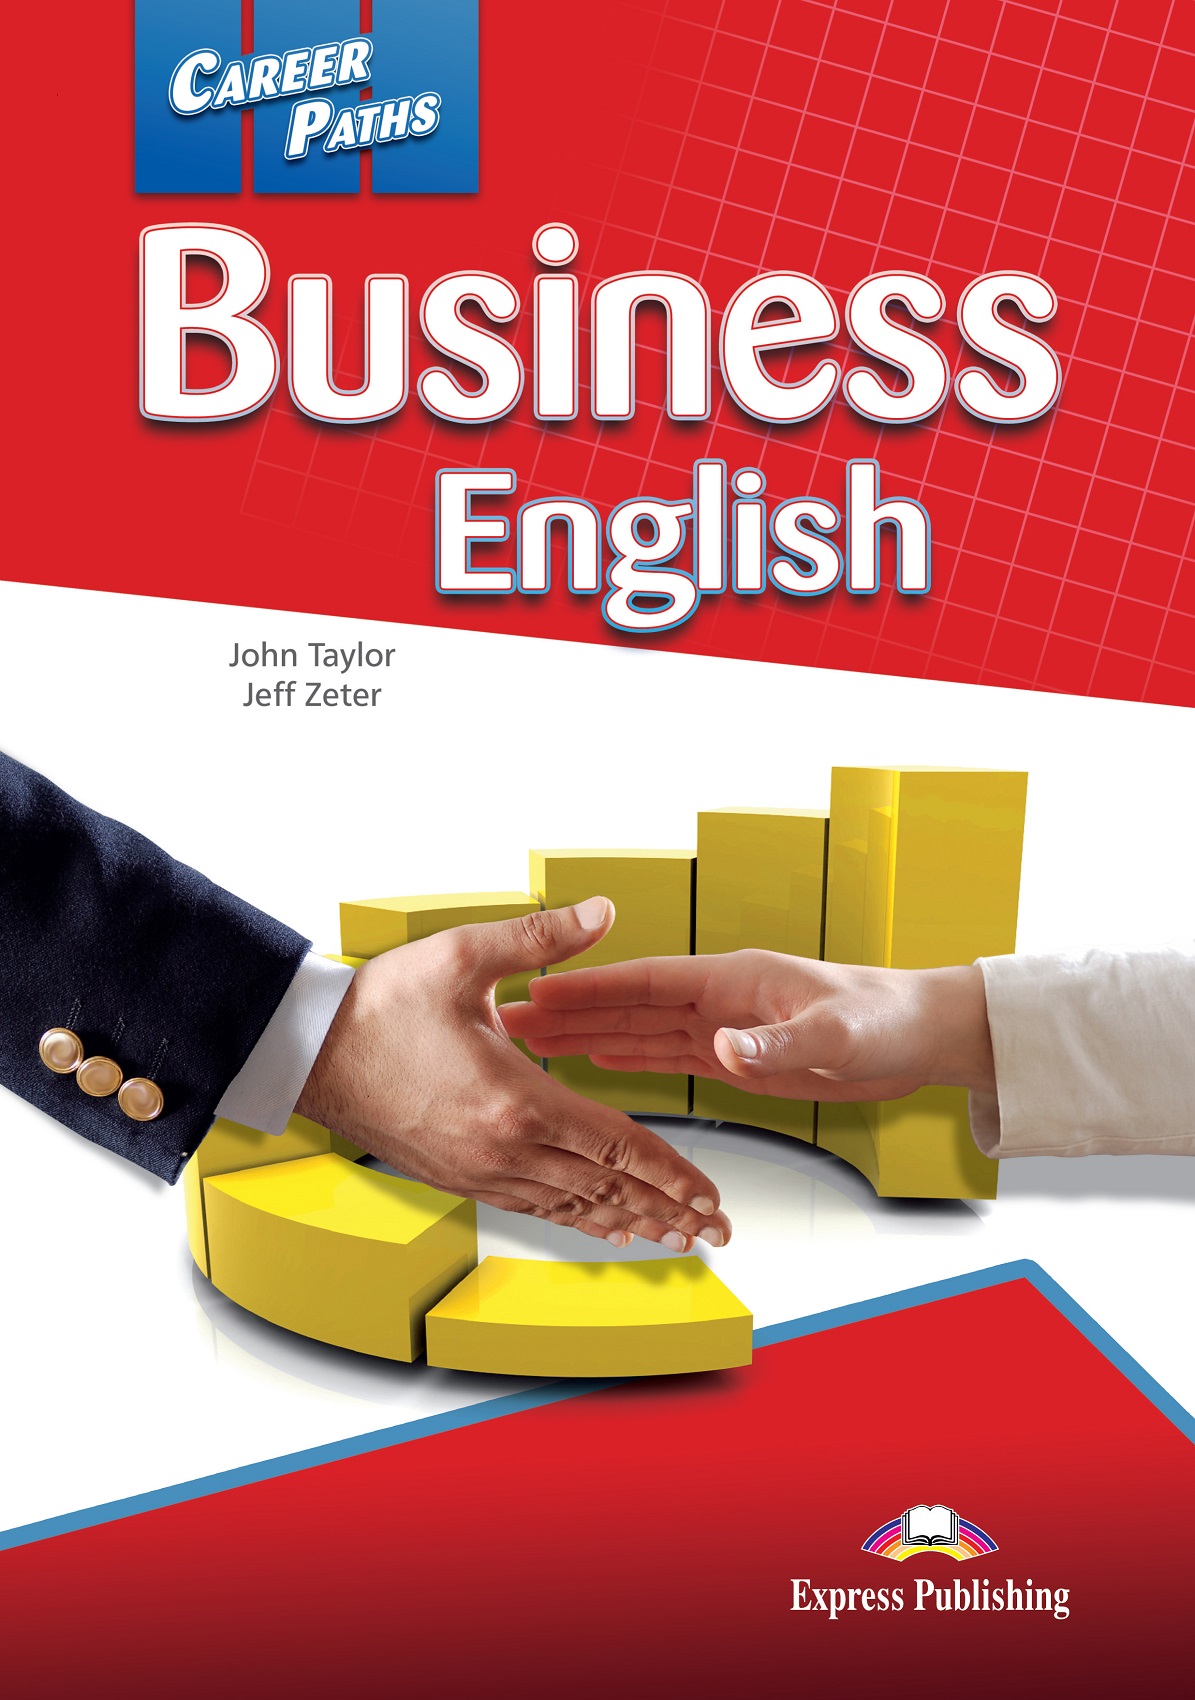 business english assignments